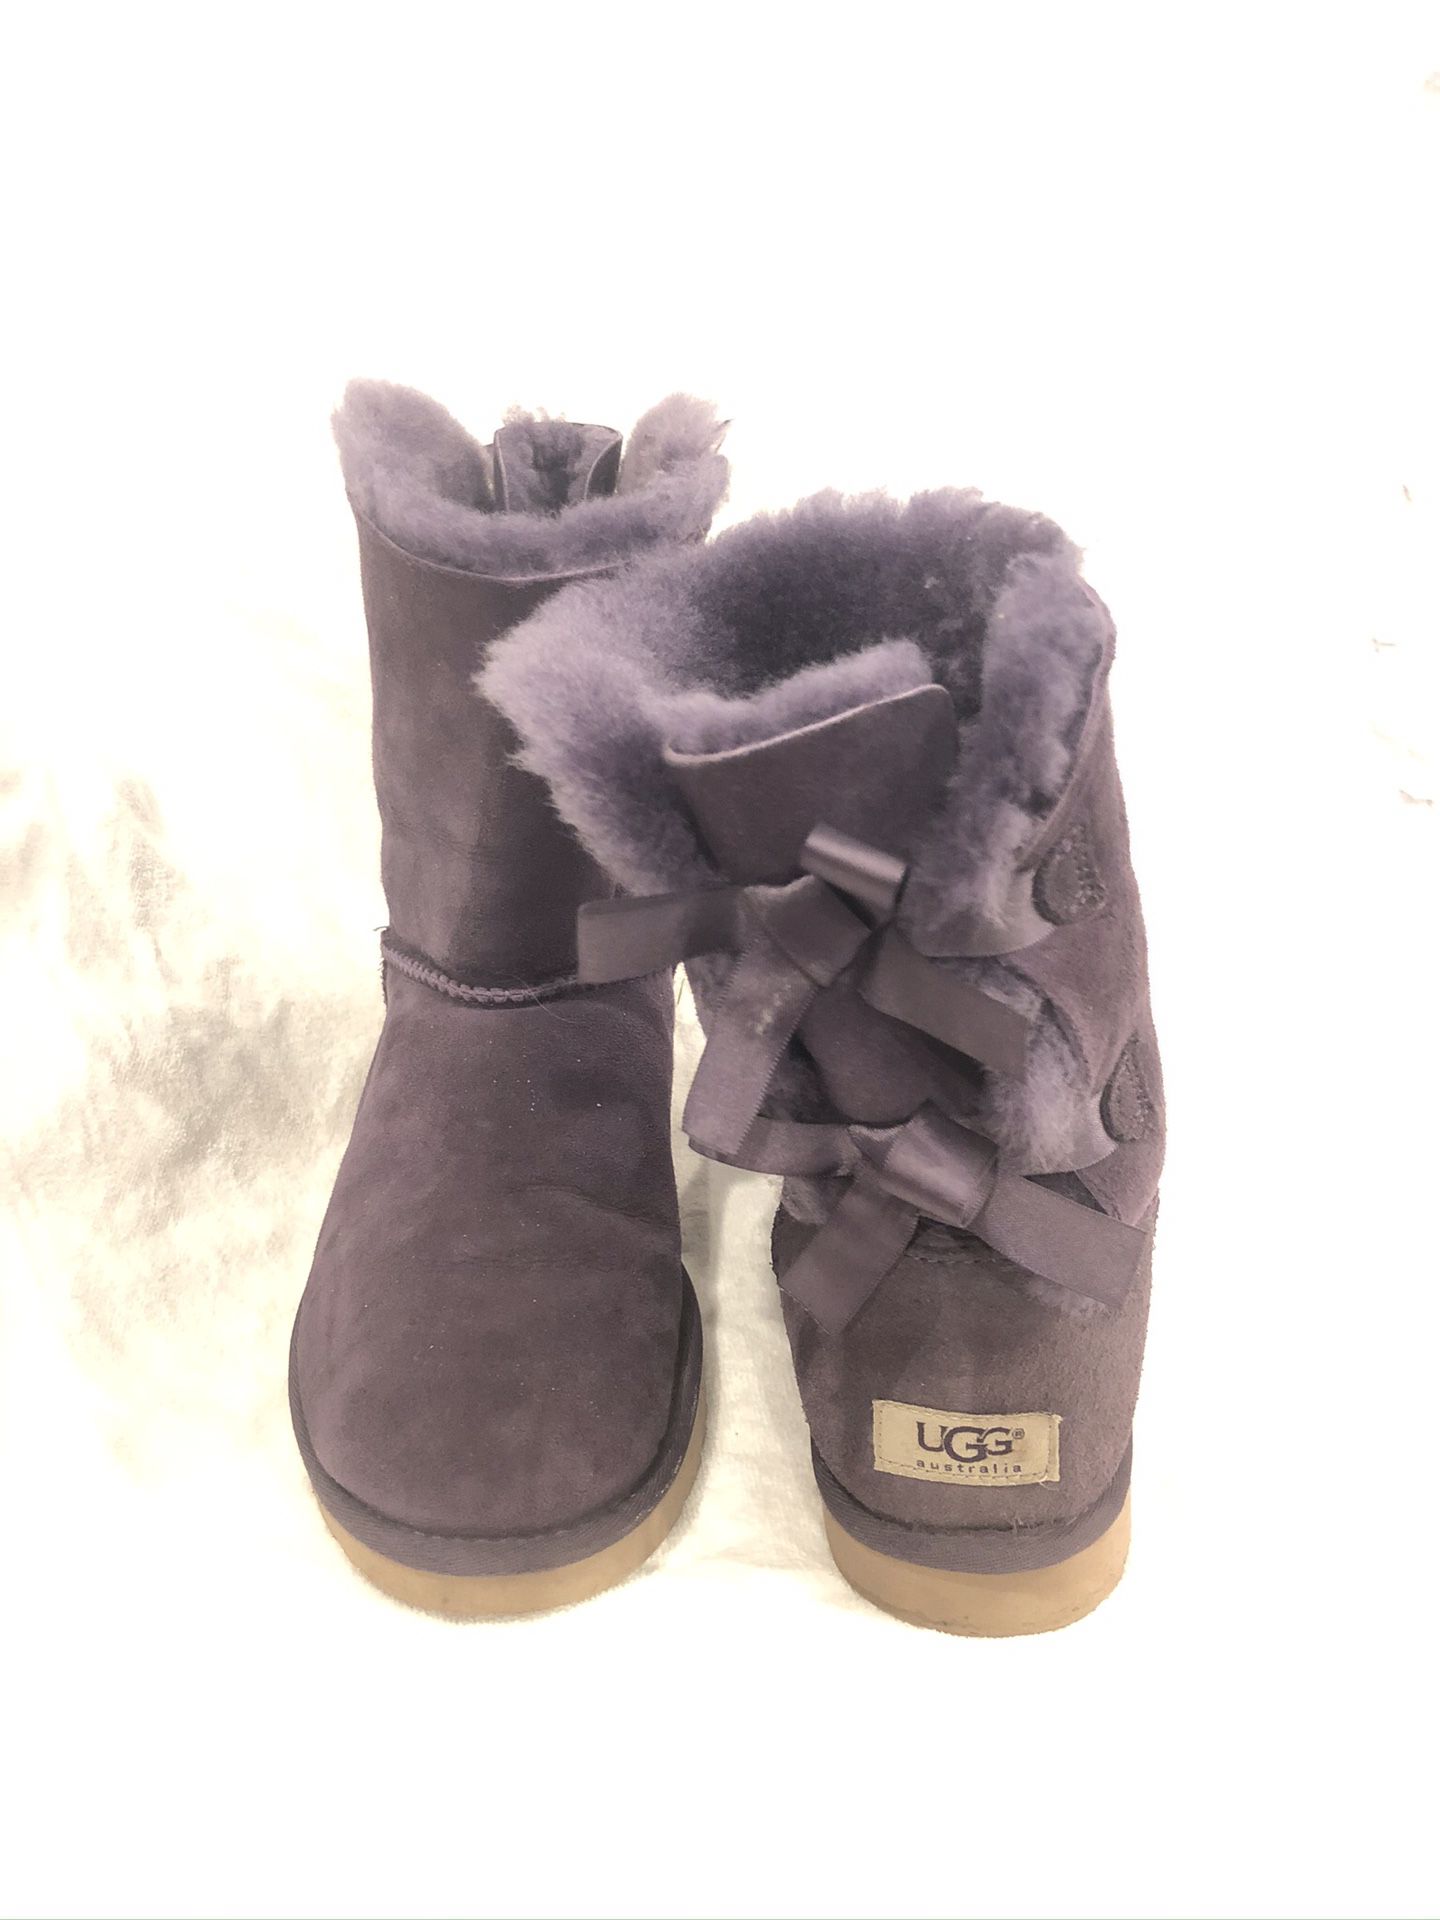 UGG Bailey Bow Tie Boots Booties Sz 8 Purple In Excellent Used Condition